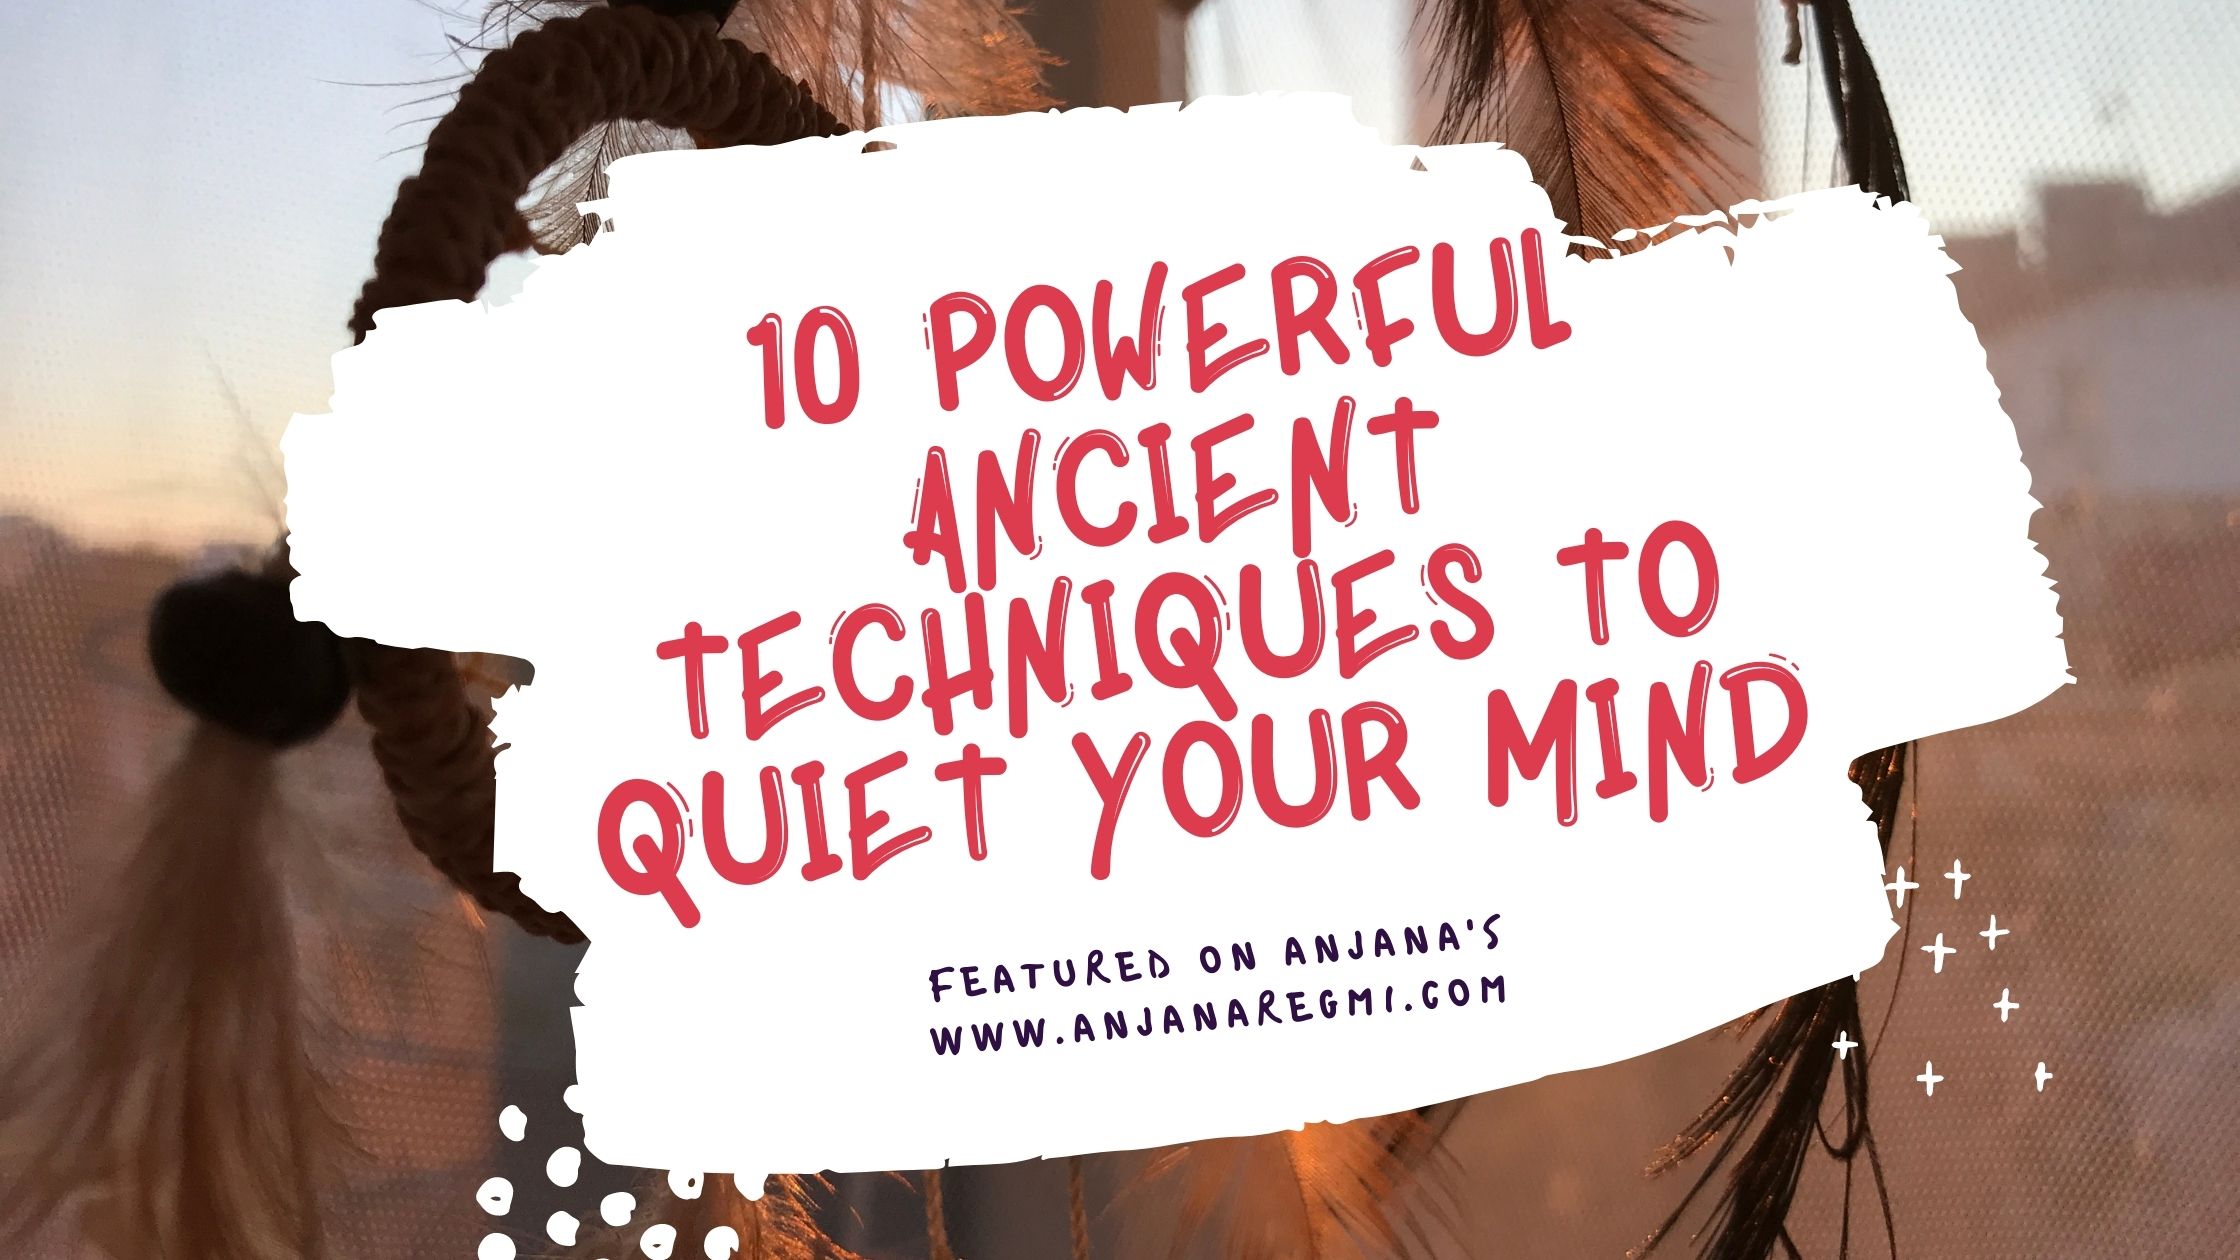 10 powerful ancient techniques to quiet your mind